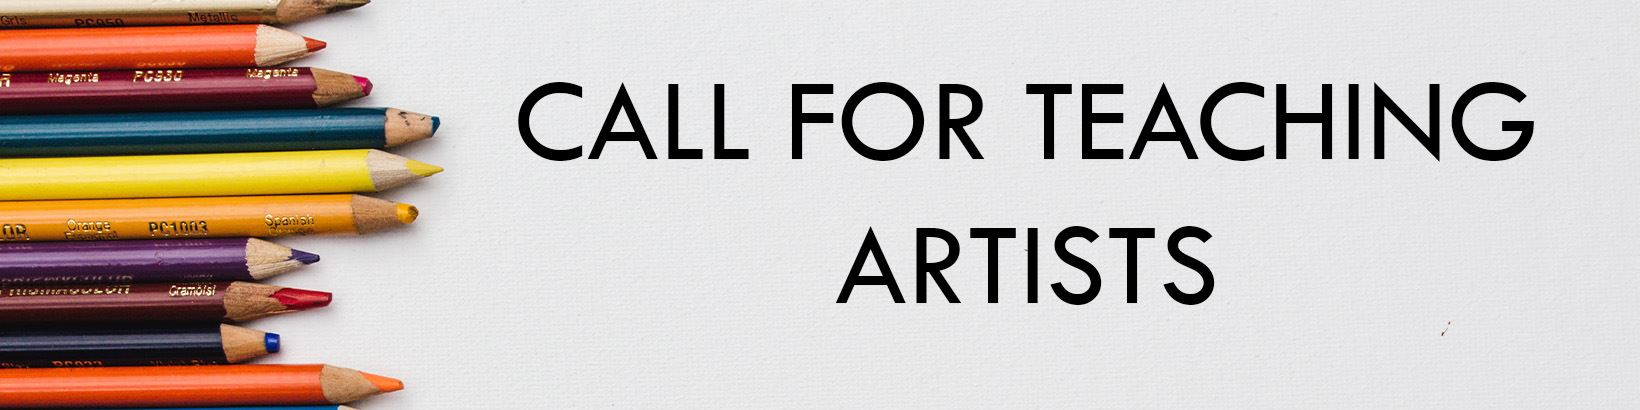 Call for Teaching Artists